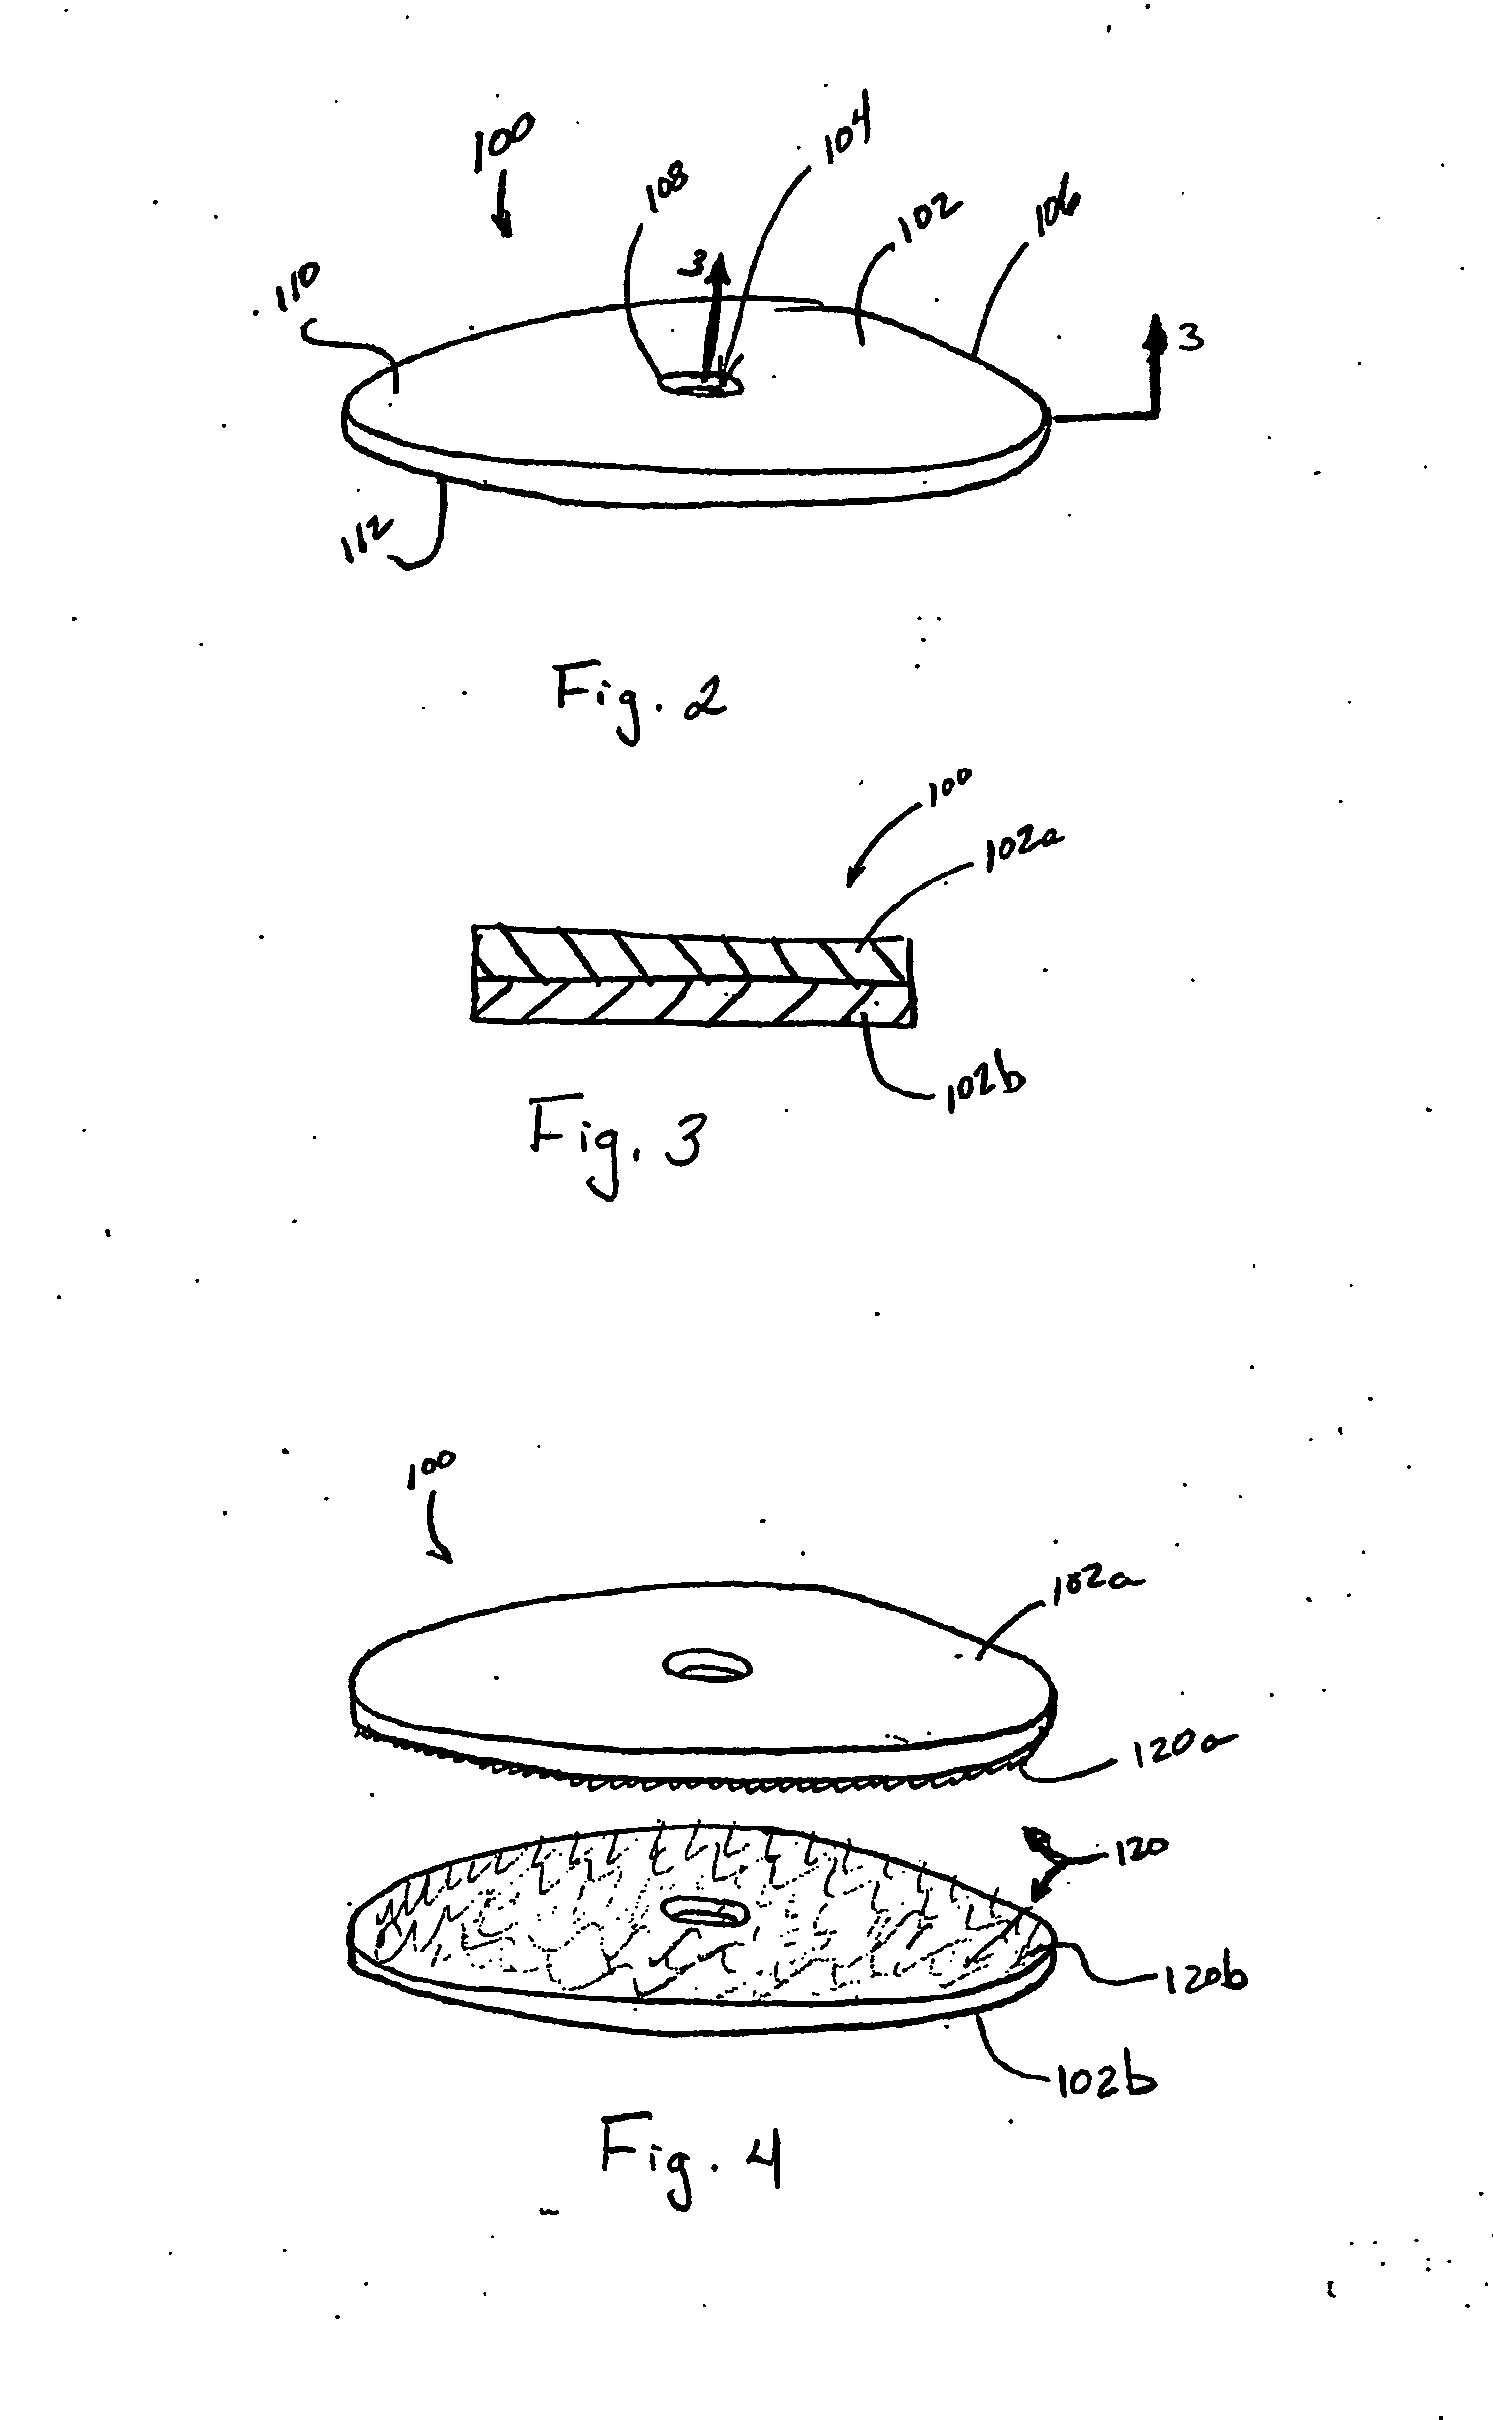 Annular adhesive structure